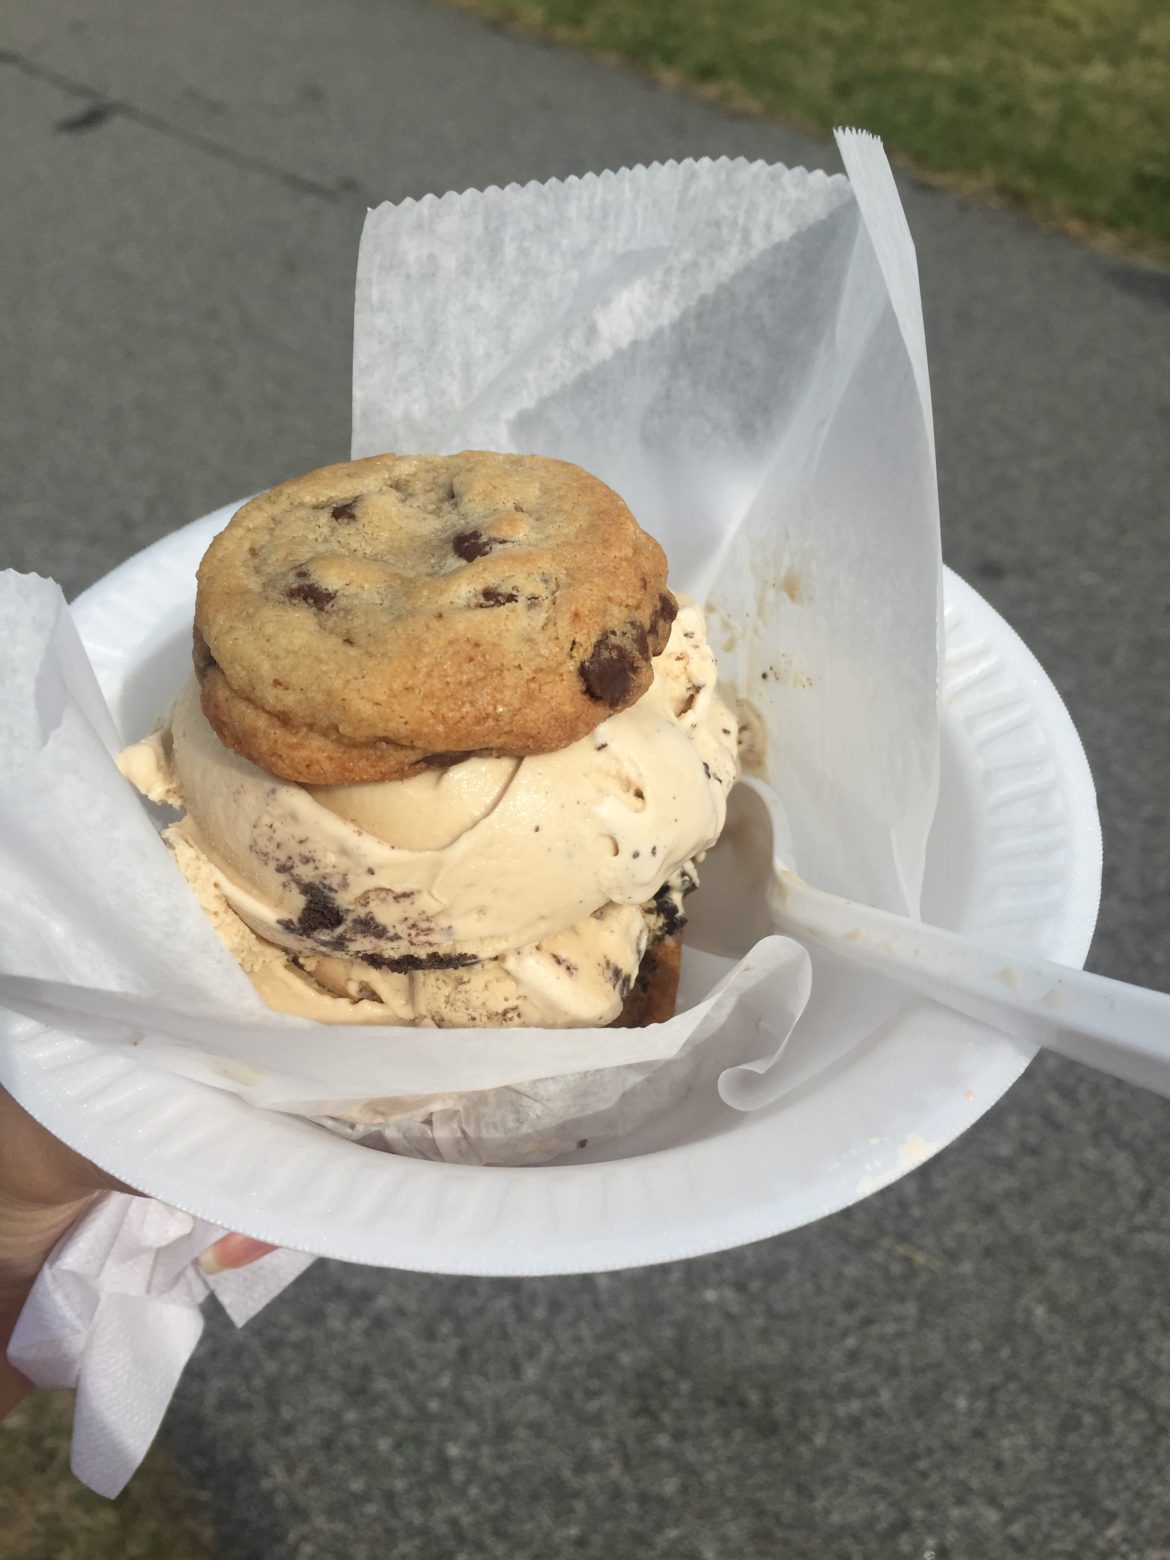 Indulge your sweet tooth at the Food Truck Festival with a Frozen Hoagie.